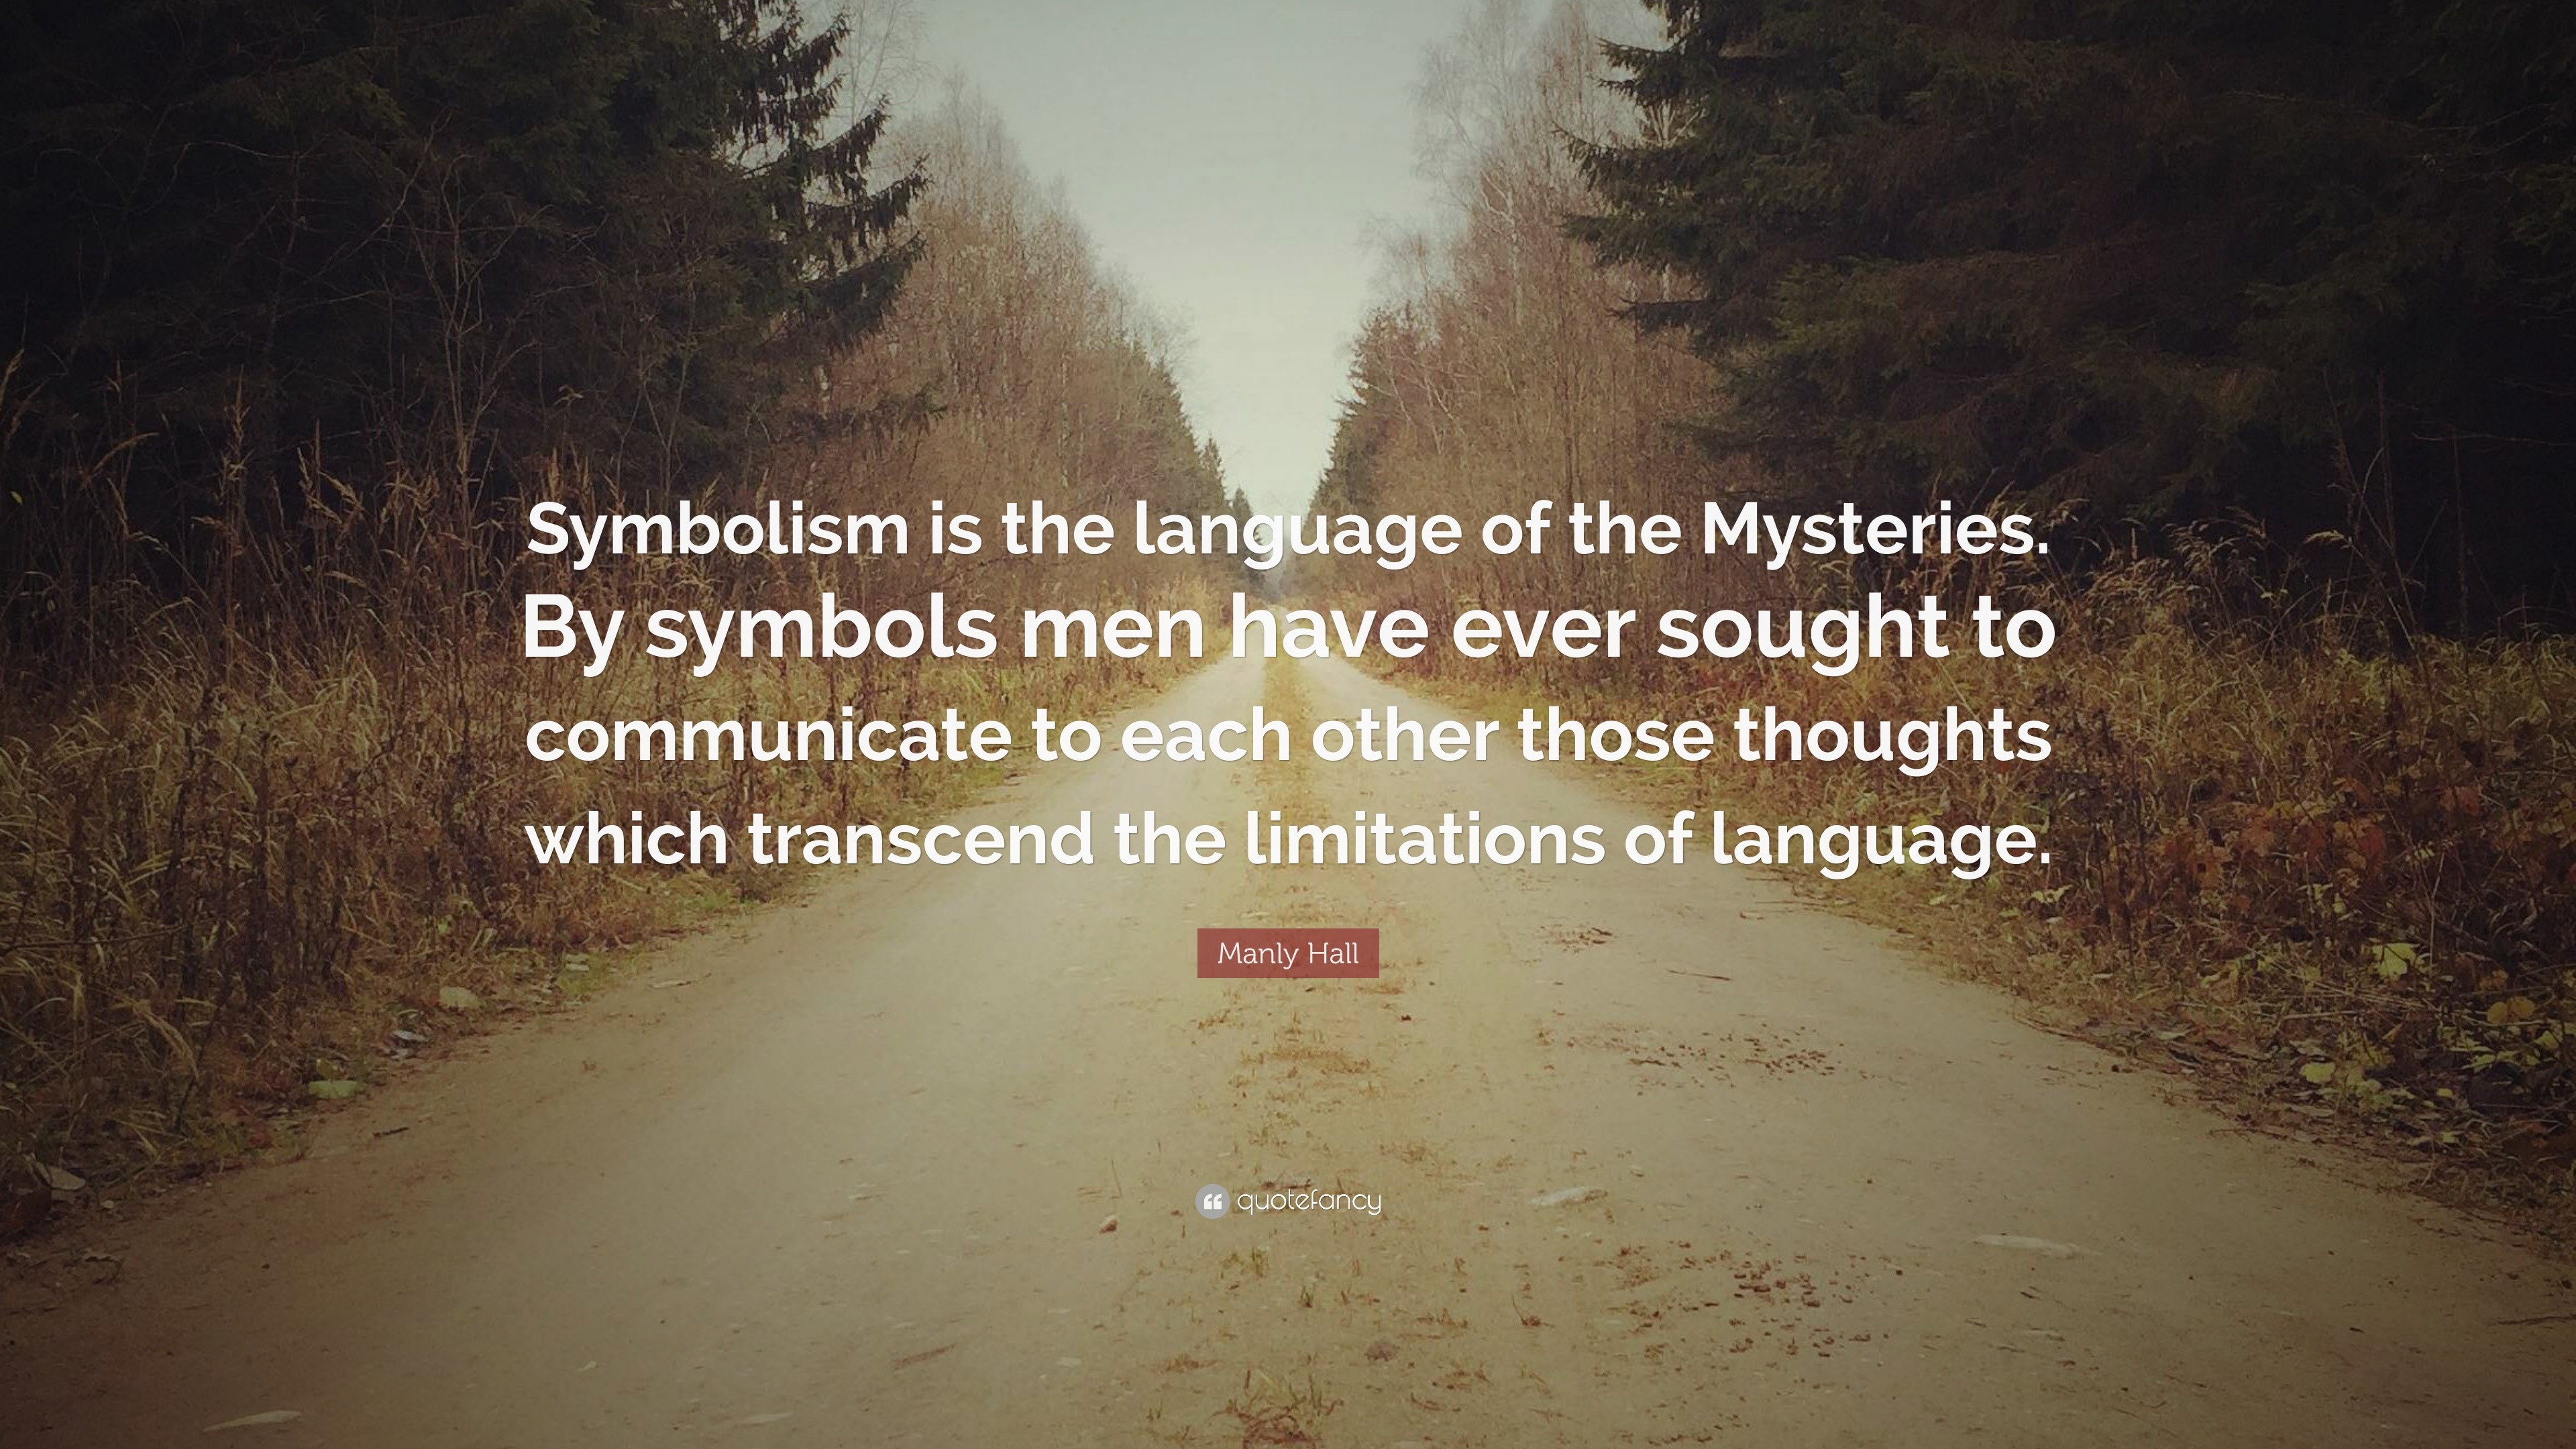 Manly Hall Quote “Symbolism is the language of the Mysteries. By